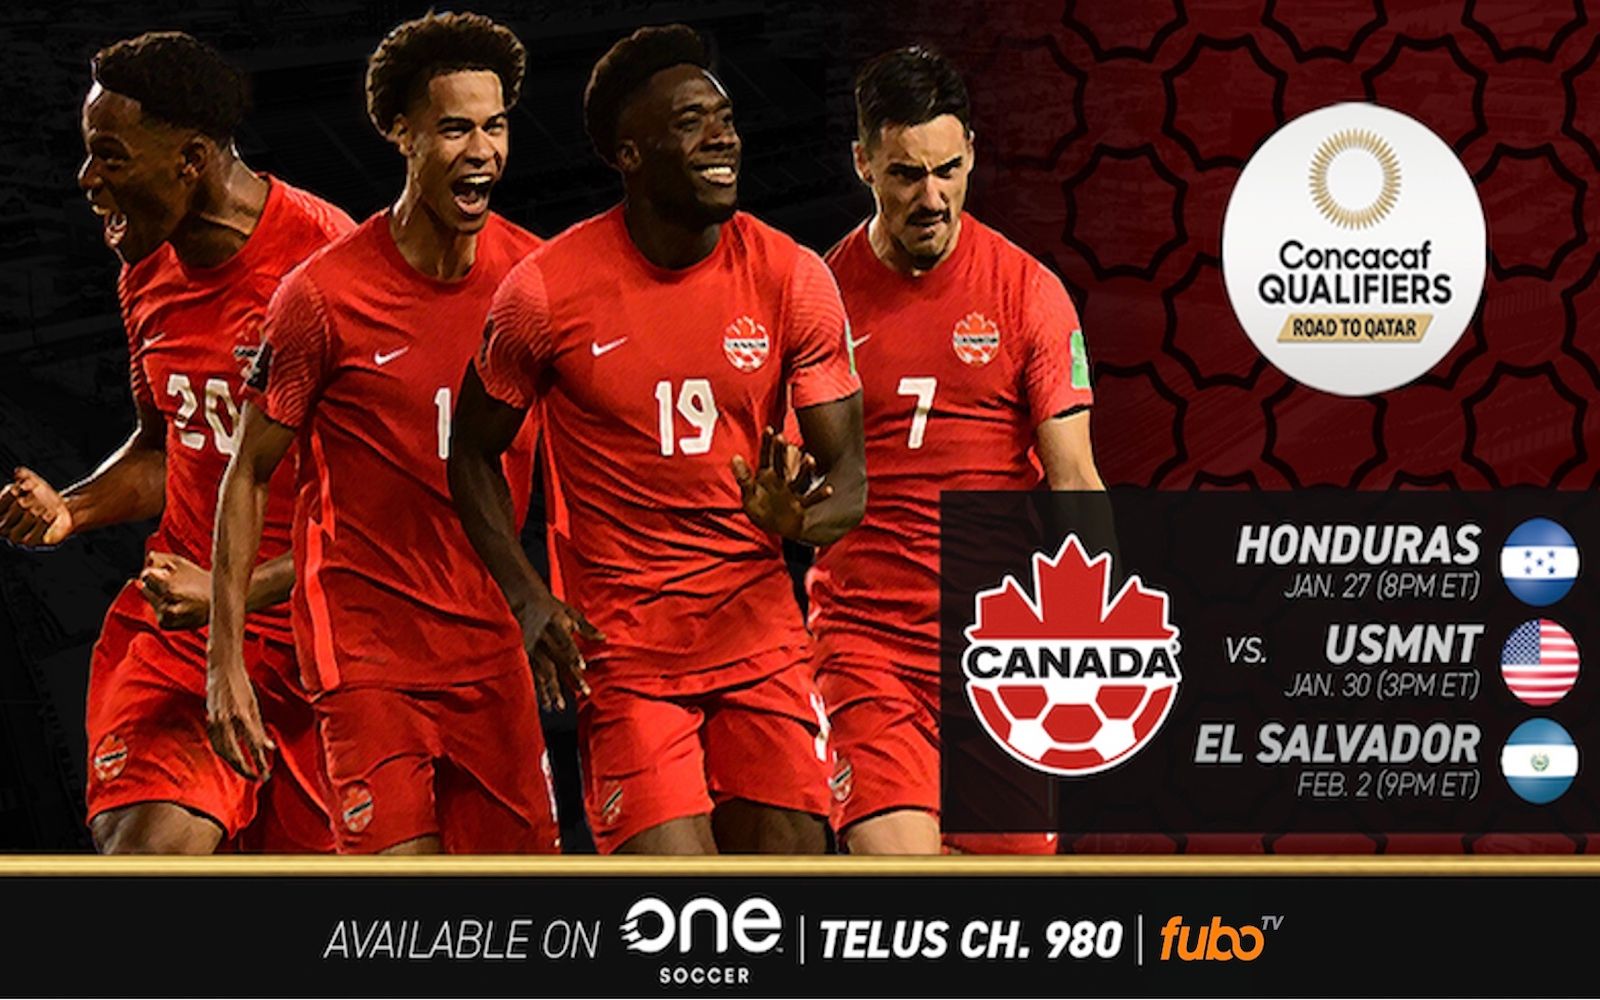 OneSoccer gears up for upcoming FIFA World Cup 2022 qualifiers, including landmark Canada v USA fixture